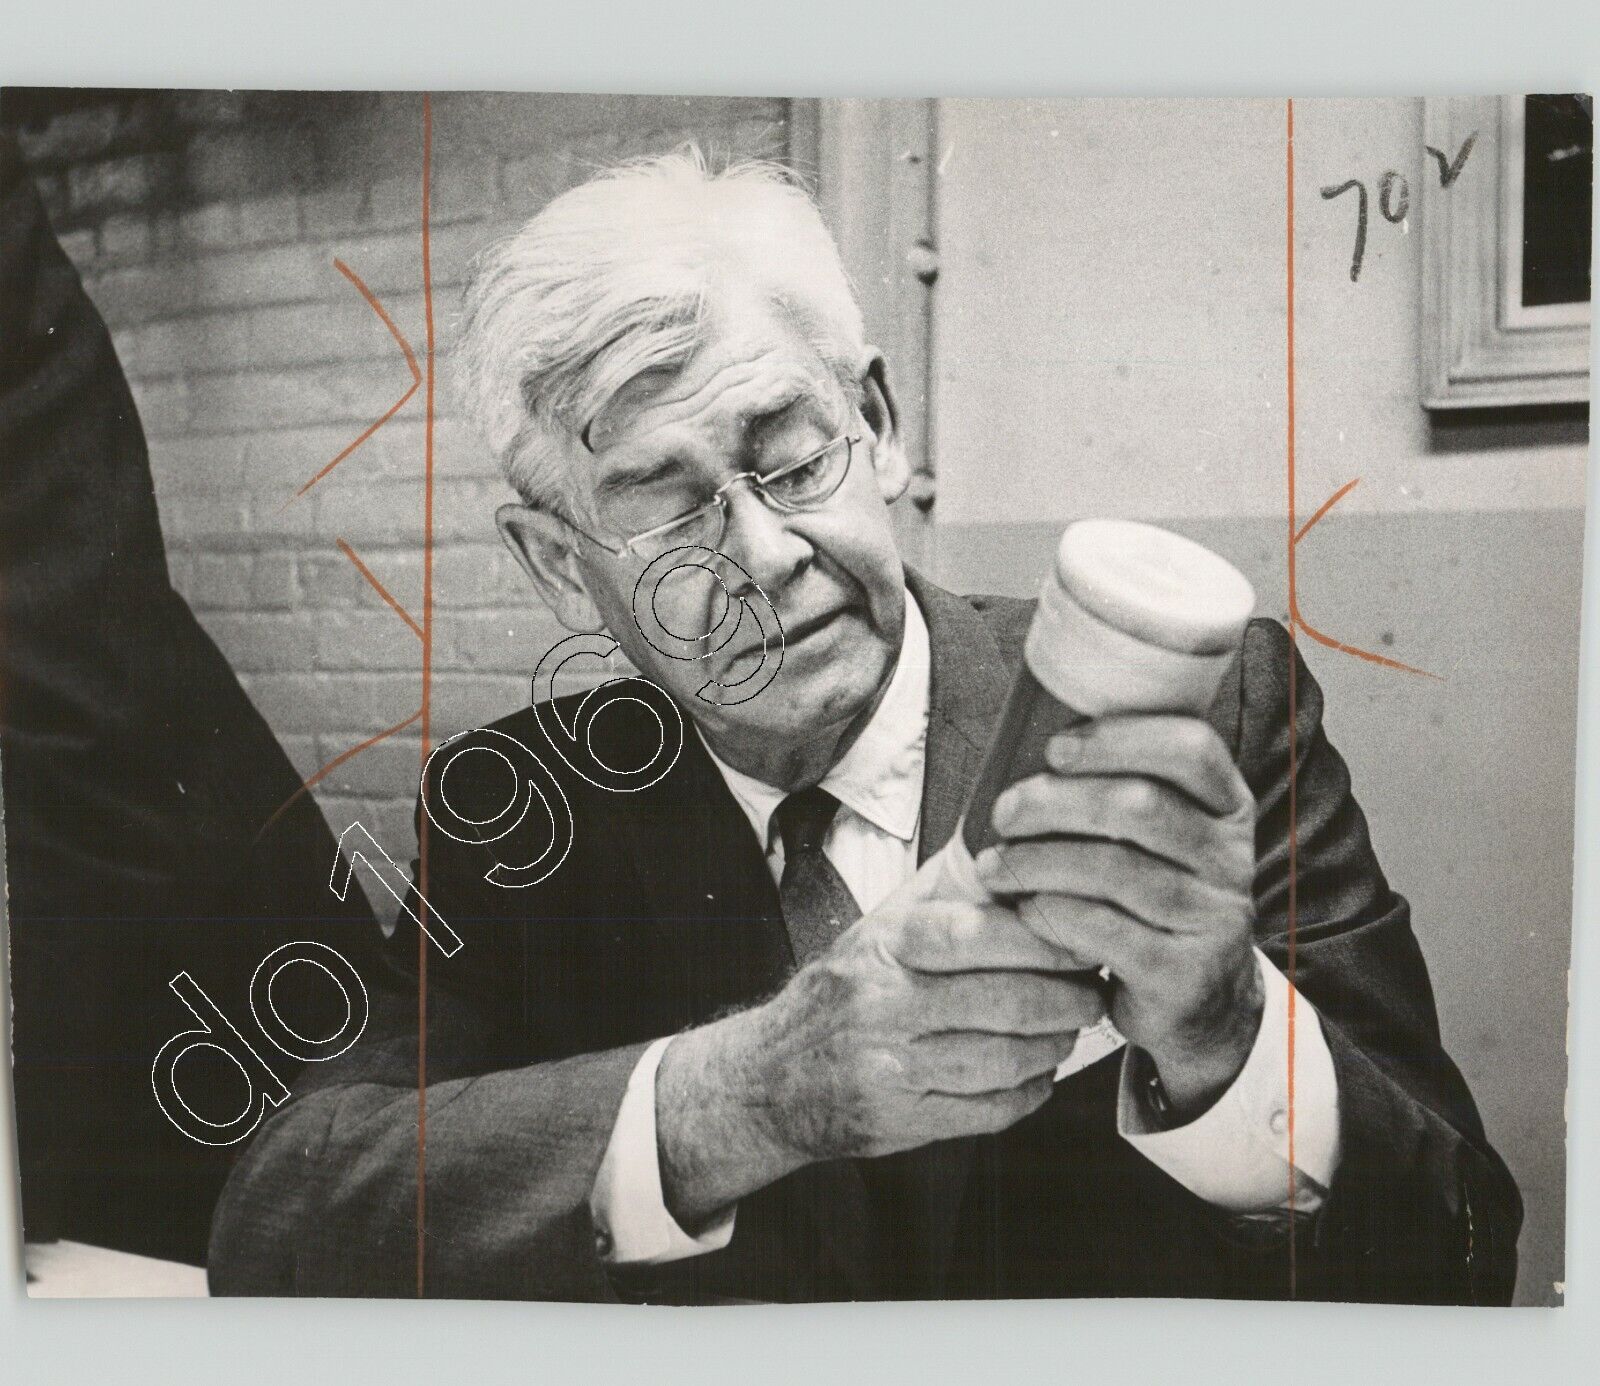 GEOLOGIST Dr. MAURICE EWING Examines Gulf Of Mex CORE SAMPLE 1968 Press Photo